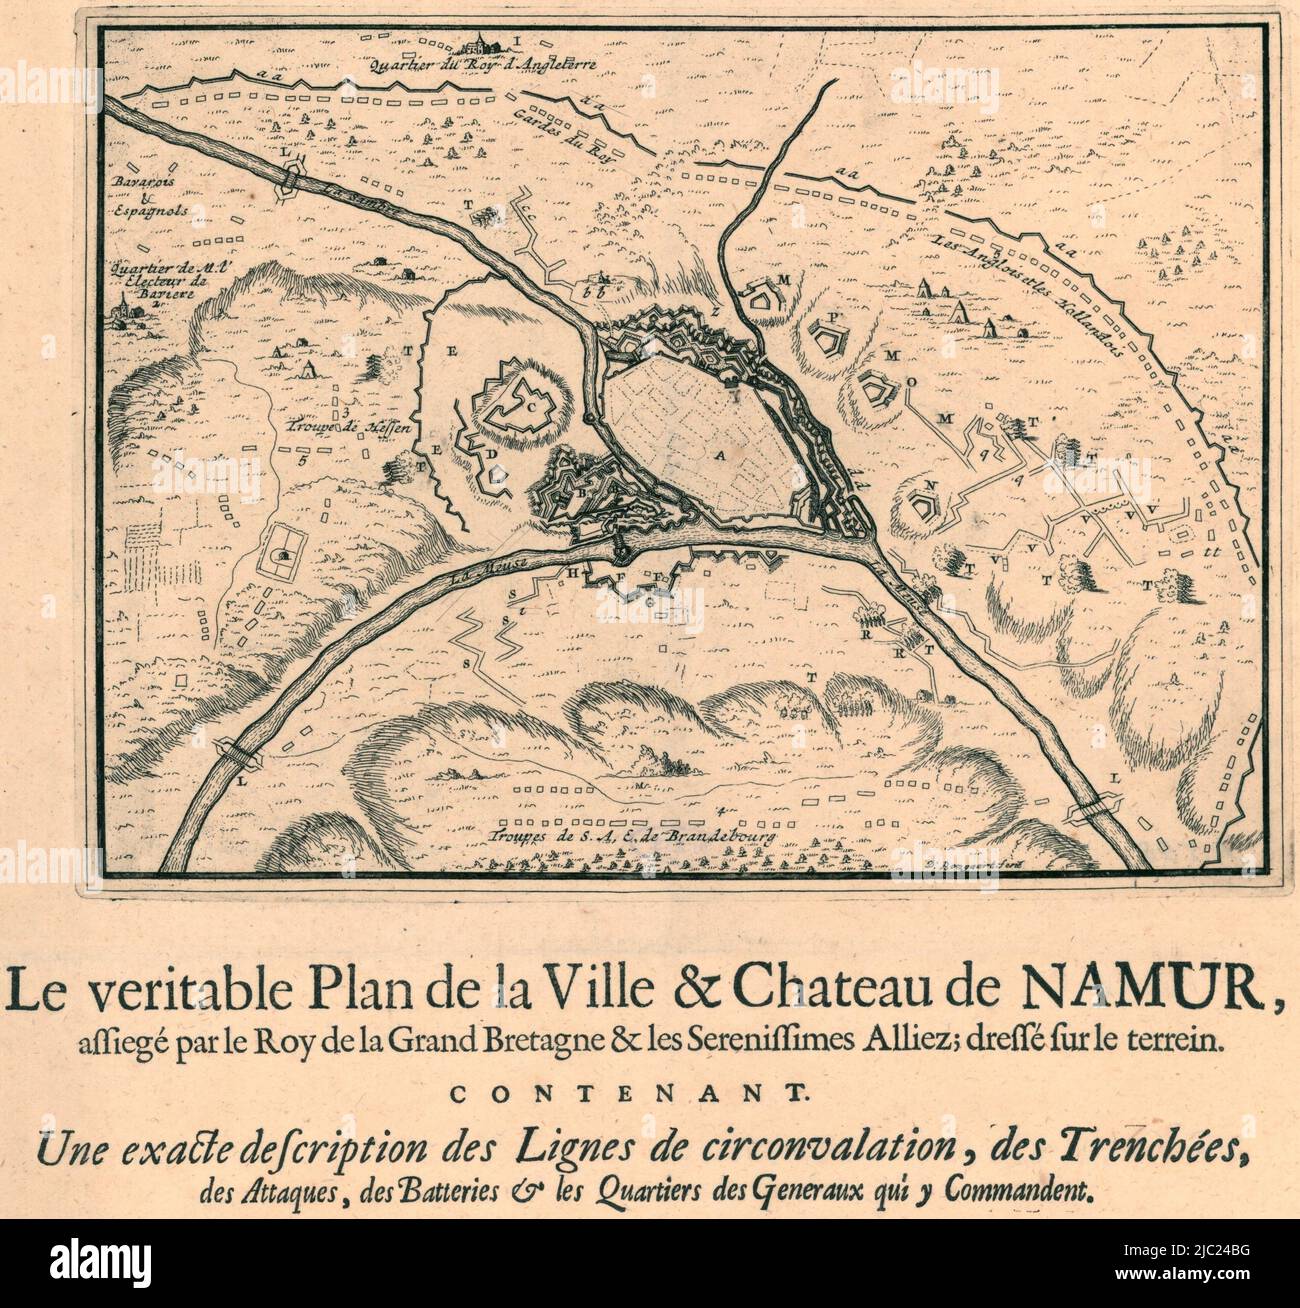 Plan of Namur and its immediate environs showing the positions of the allied troops besieging the city from 3 July 1695. Below the representation legend 1-5, A-Z and aa-tt in French., Map of the Siege of Namur, 1695 La veritable Plan de la Ville & Chateau de Namur, assieg, print maker: Daniel Bongaert, (mentioned on object), publisher: Etienne Foulque, (mentioned on object), print maker: Northern Netherlands, publisher: The Hague, 1695, paper, etching, letterpress printing, h 365 mm × w 323 mm Stock Photo